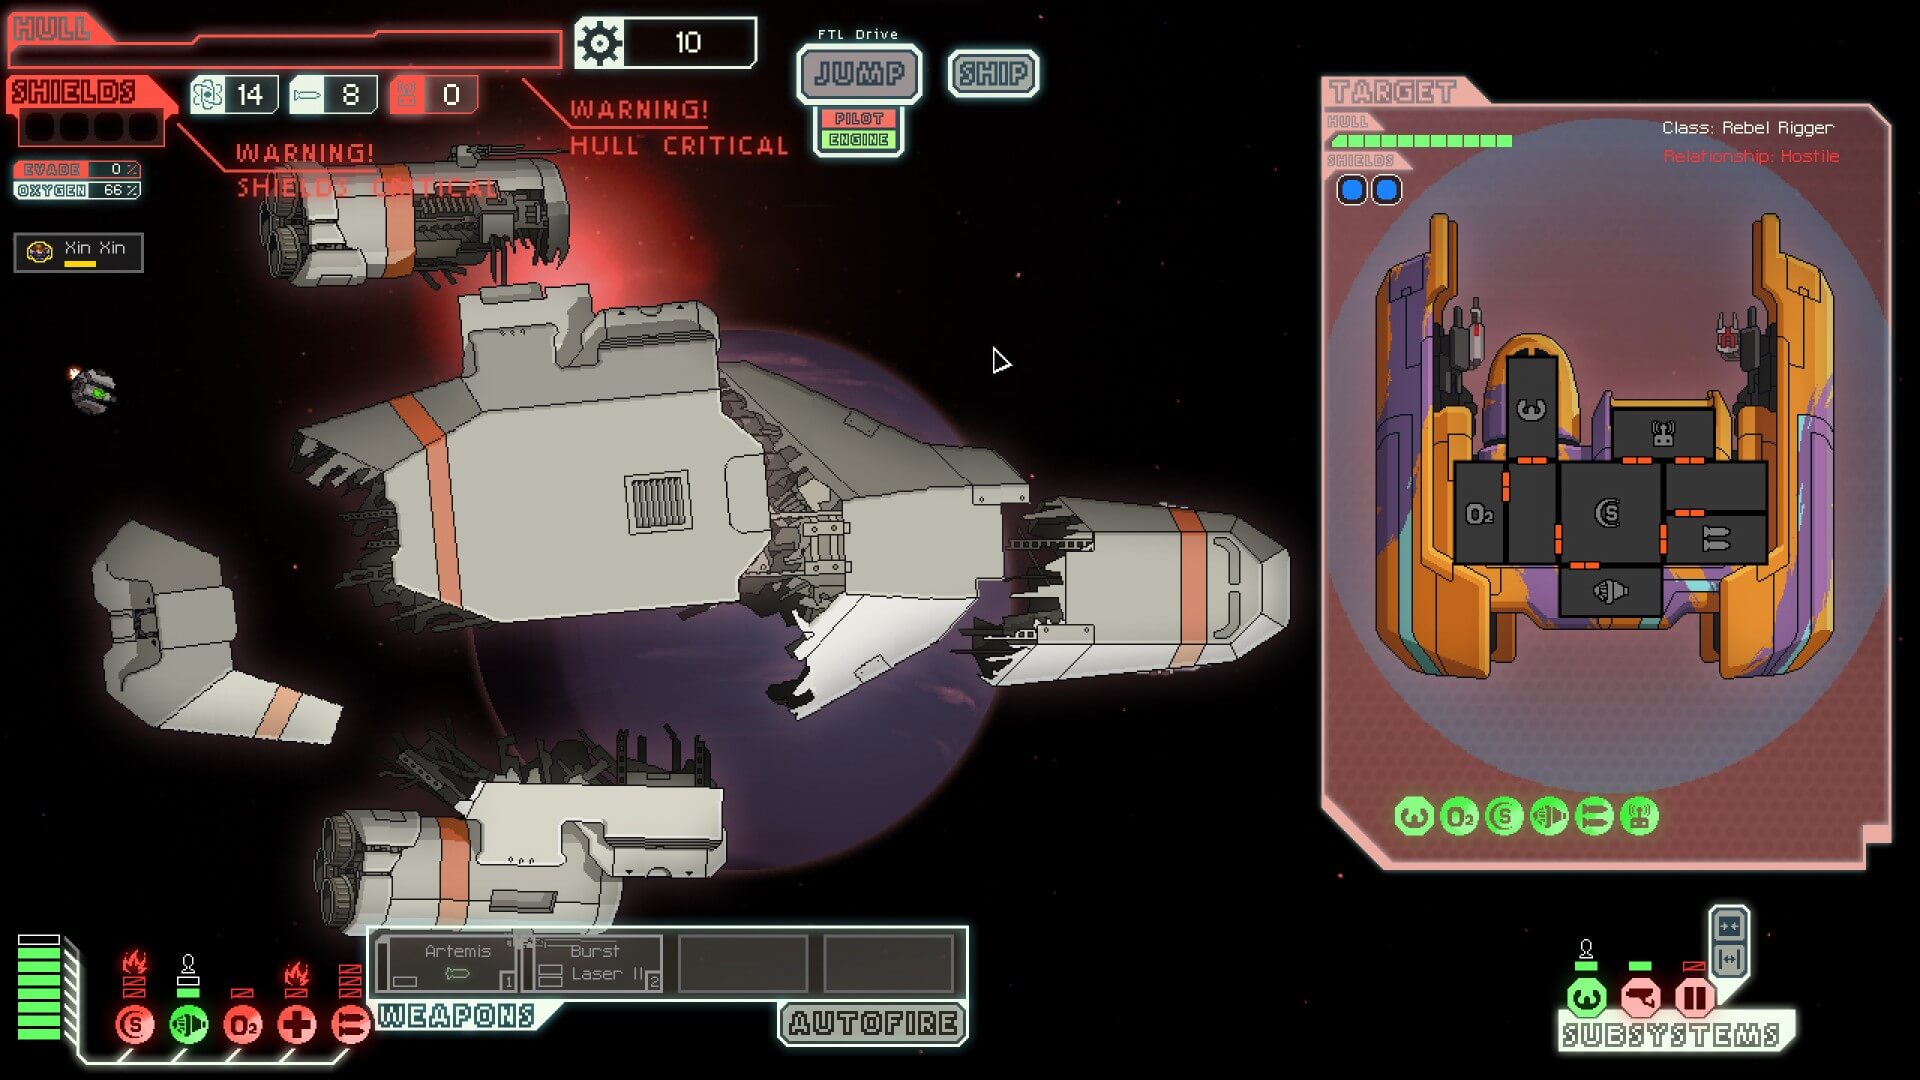 Ftl Faster Than Light Is Available For Free On Epic Games Store For The Next 24 Hours